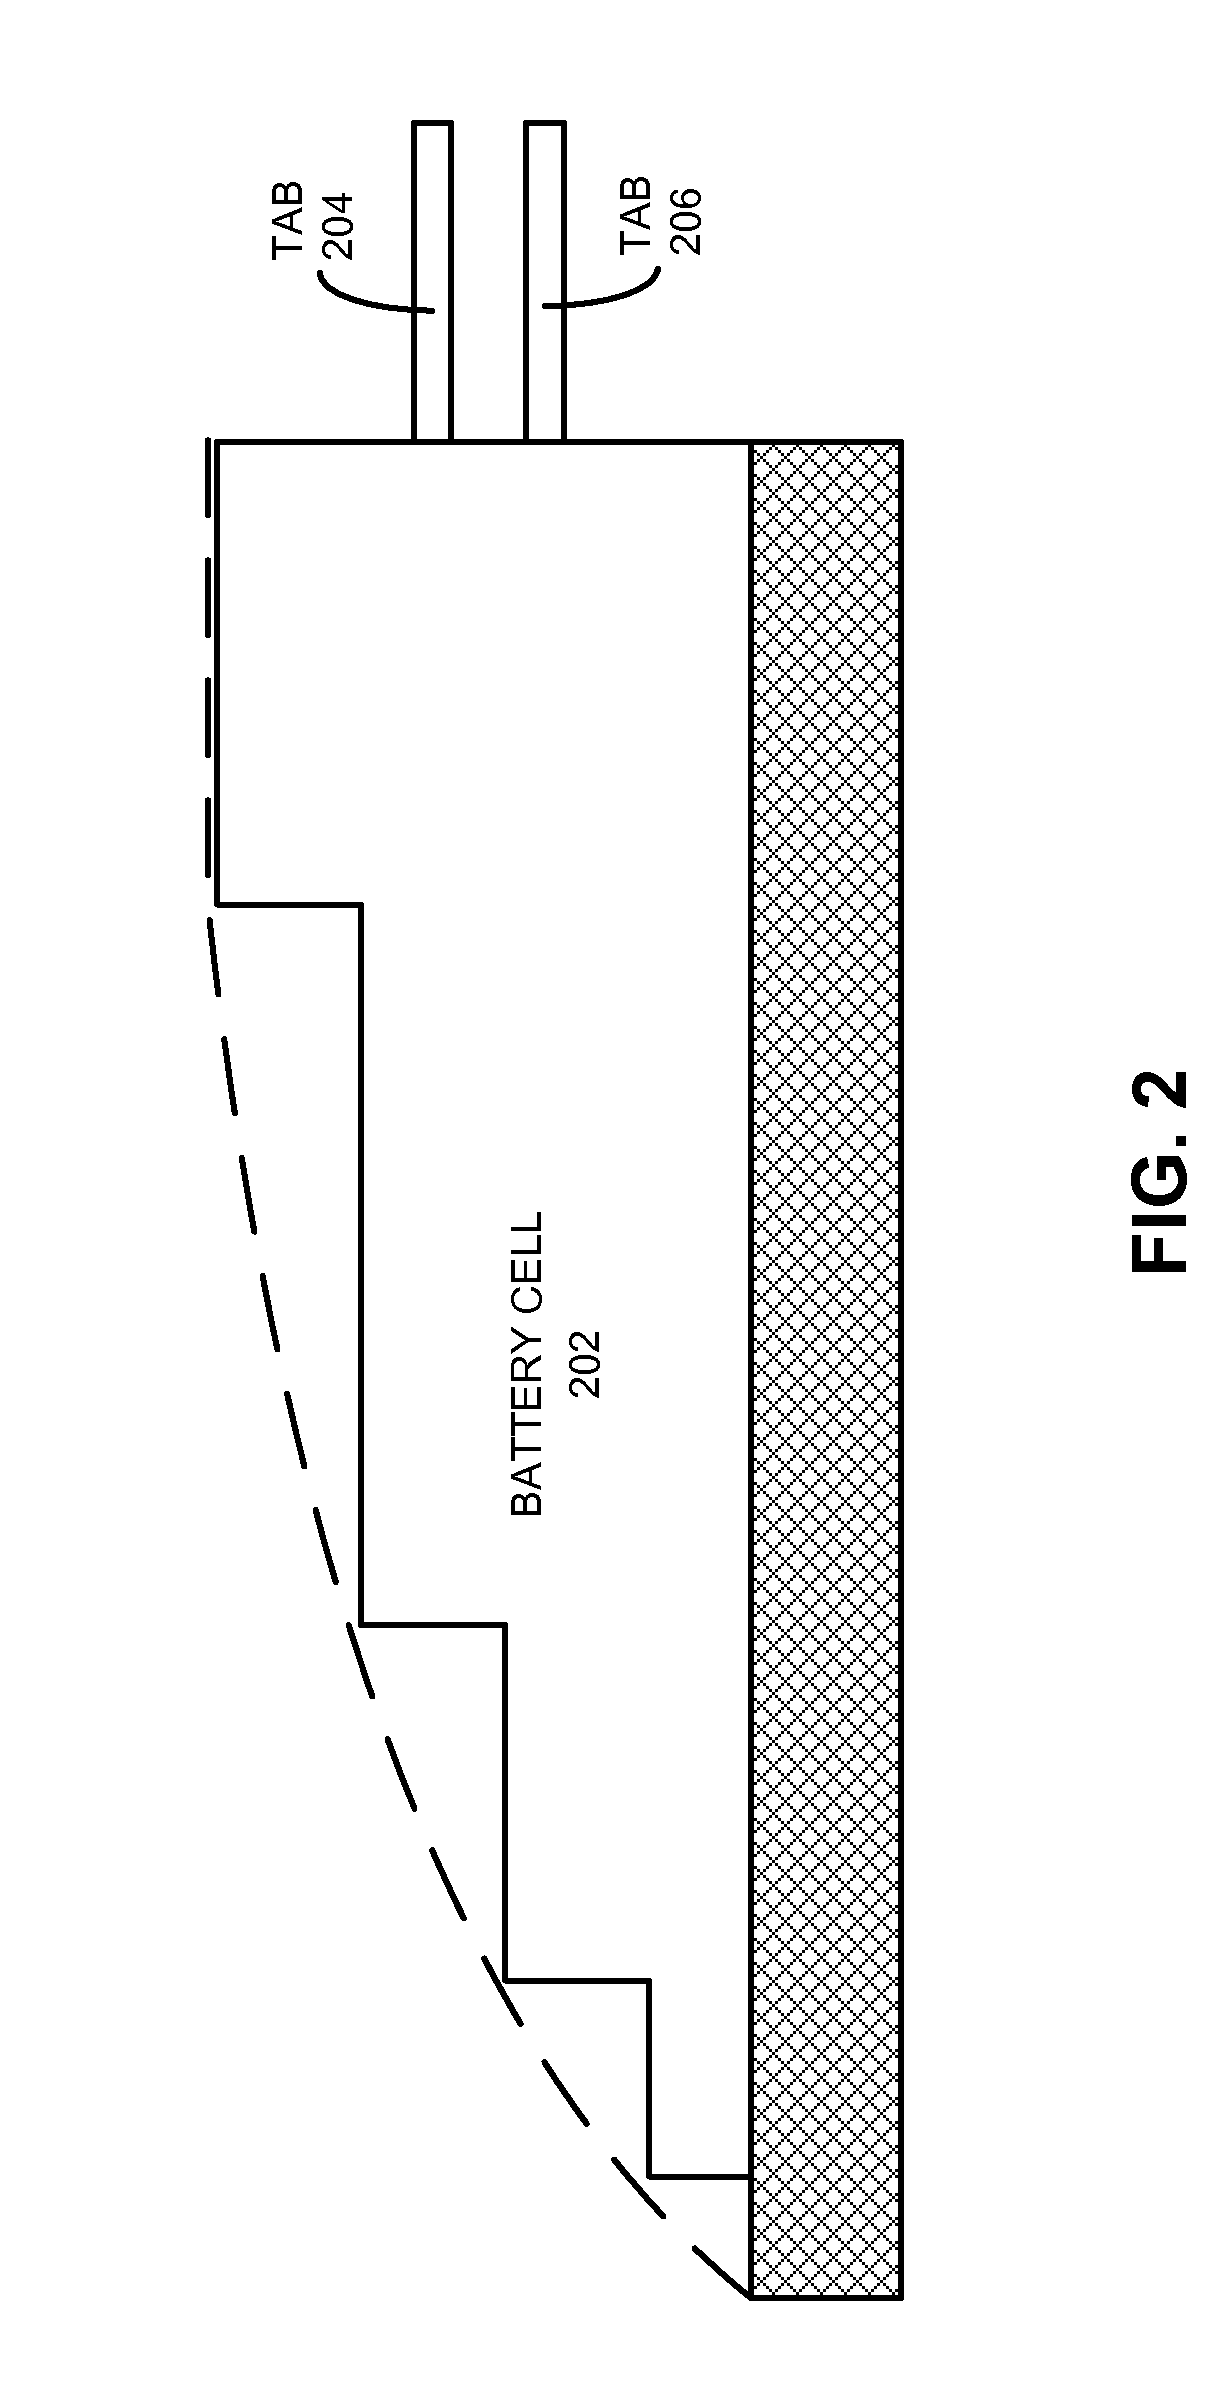 Rechargeable battery with a jelly roll having multiple thicknesses